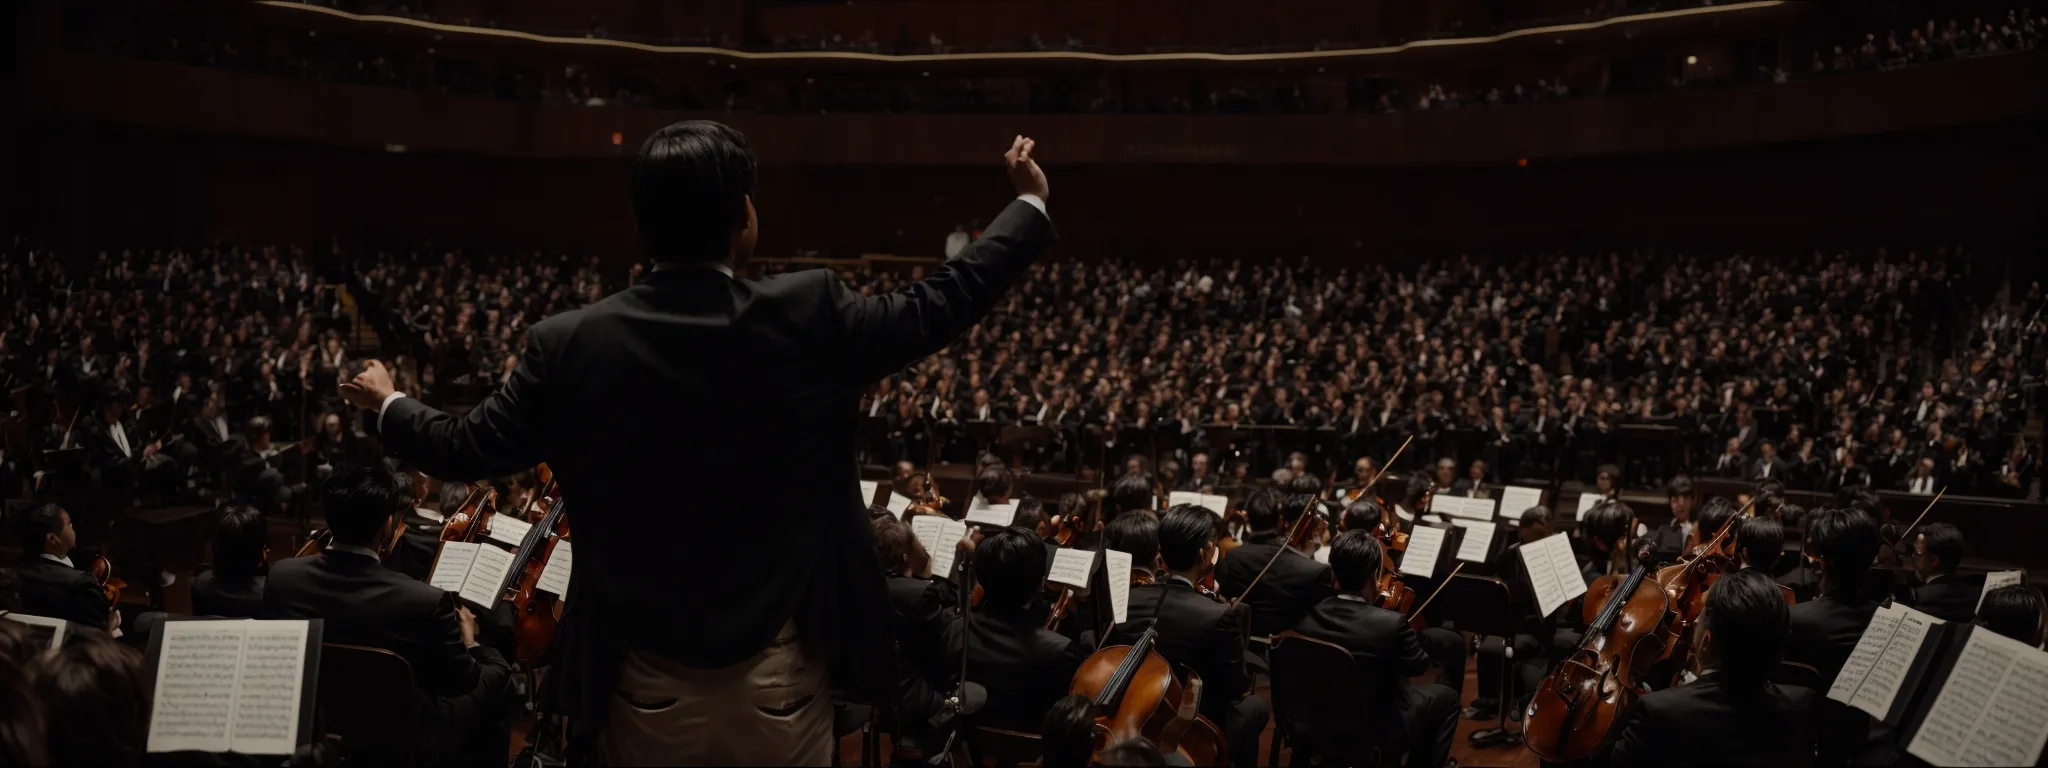 a conductor stands poised before an orchestra, arms aloft, ready to direct a harmonious performance.